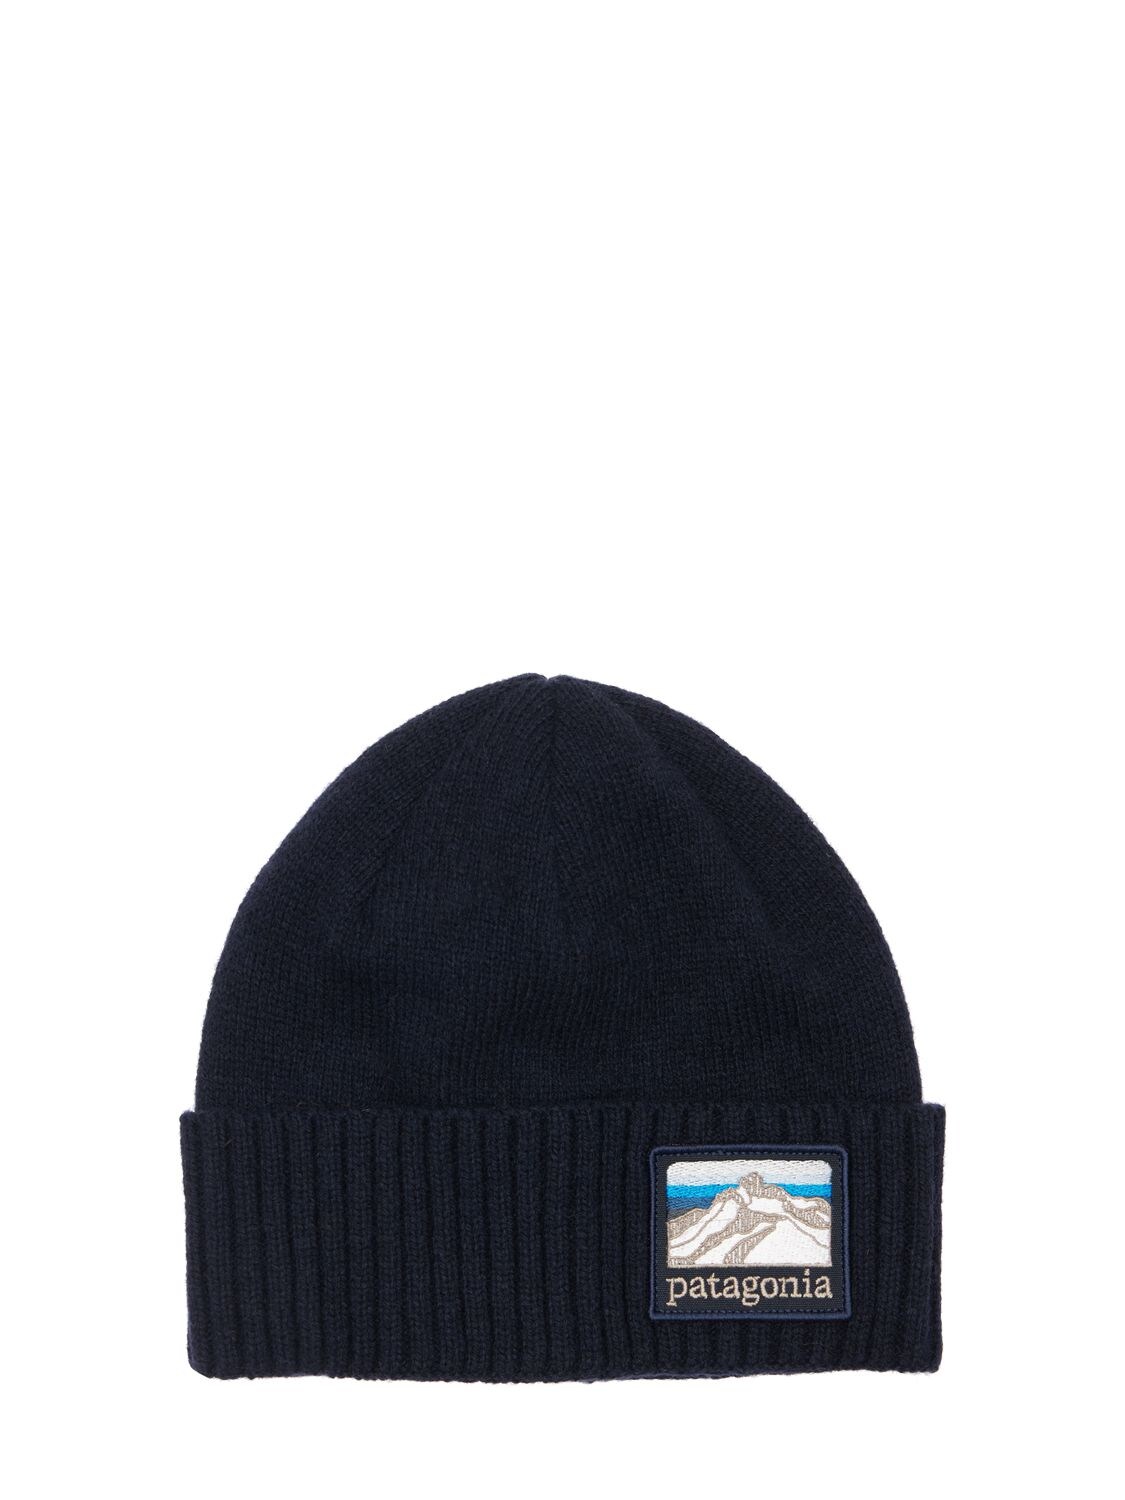 Patagonia Brodeo Rolled Beanie